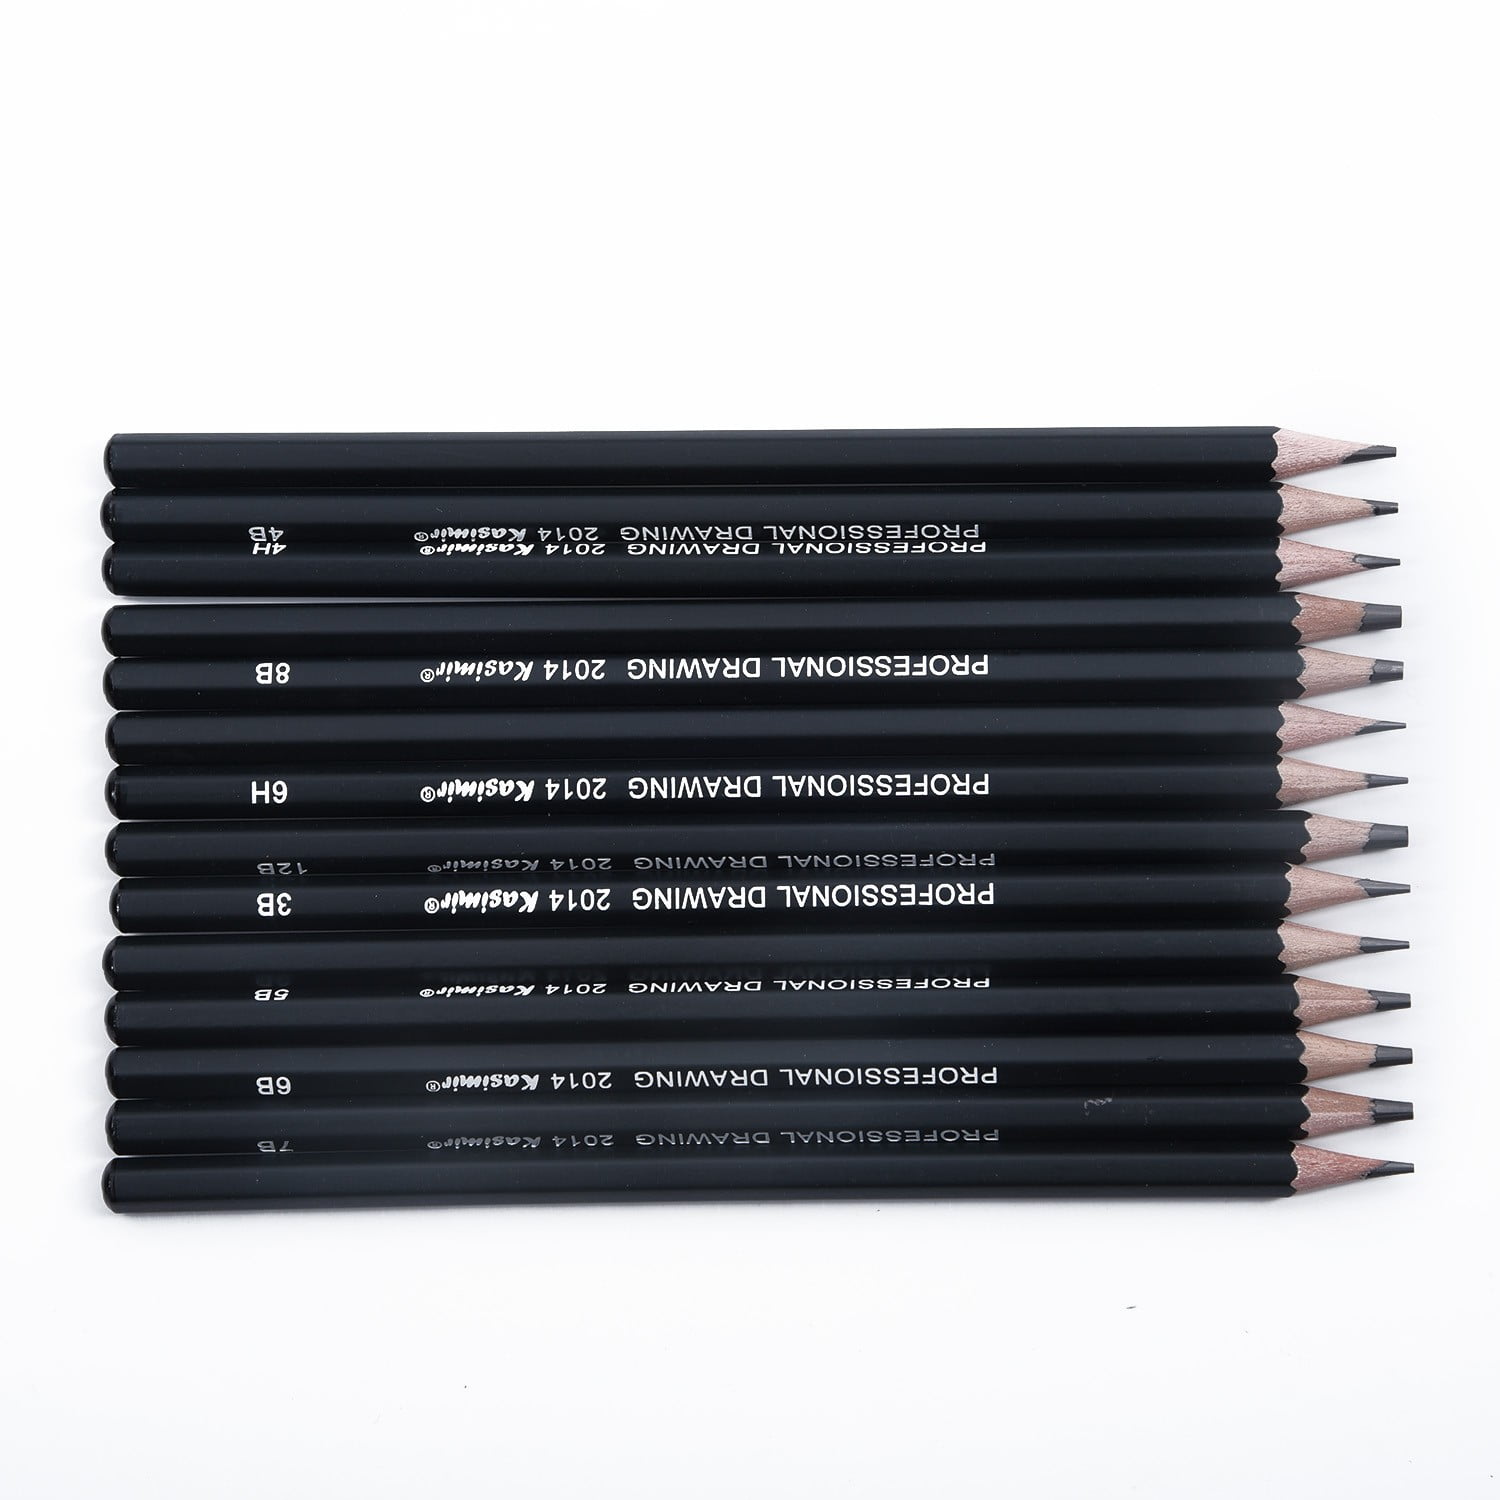 ROCOD Profession Sketch Pencils 6b to 4H for Kids and Adults Drawing, Art Graphite Pencil for Artists Beginner Sketching